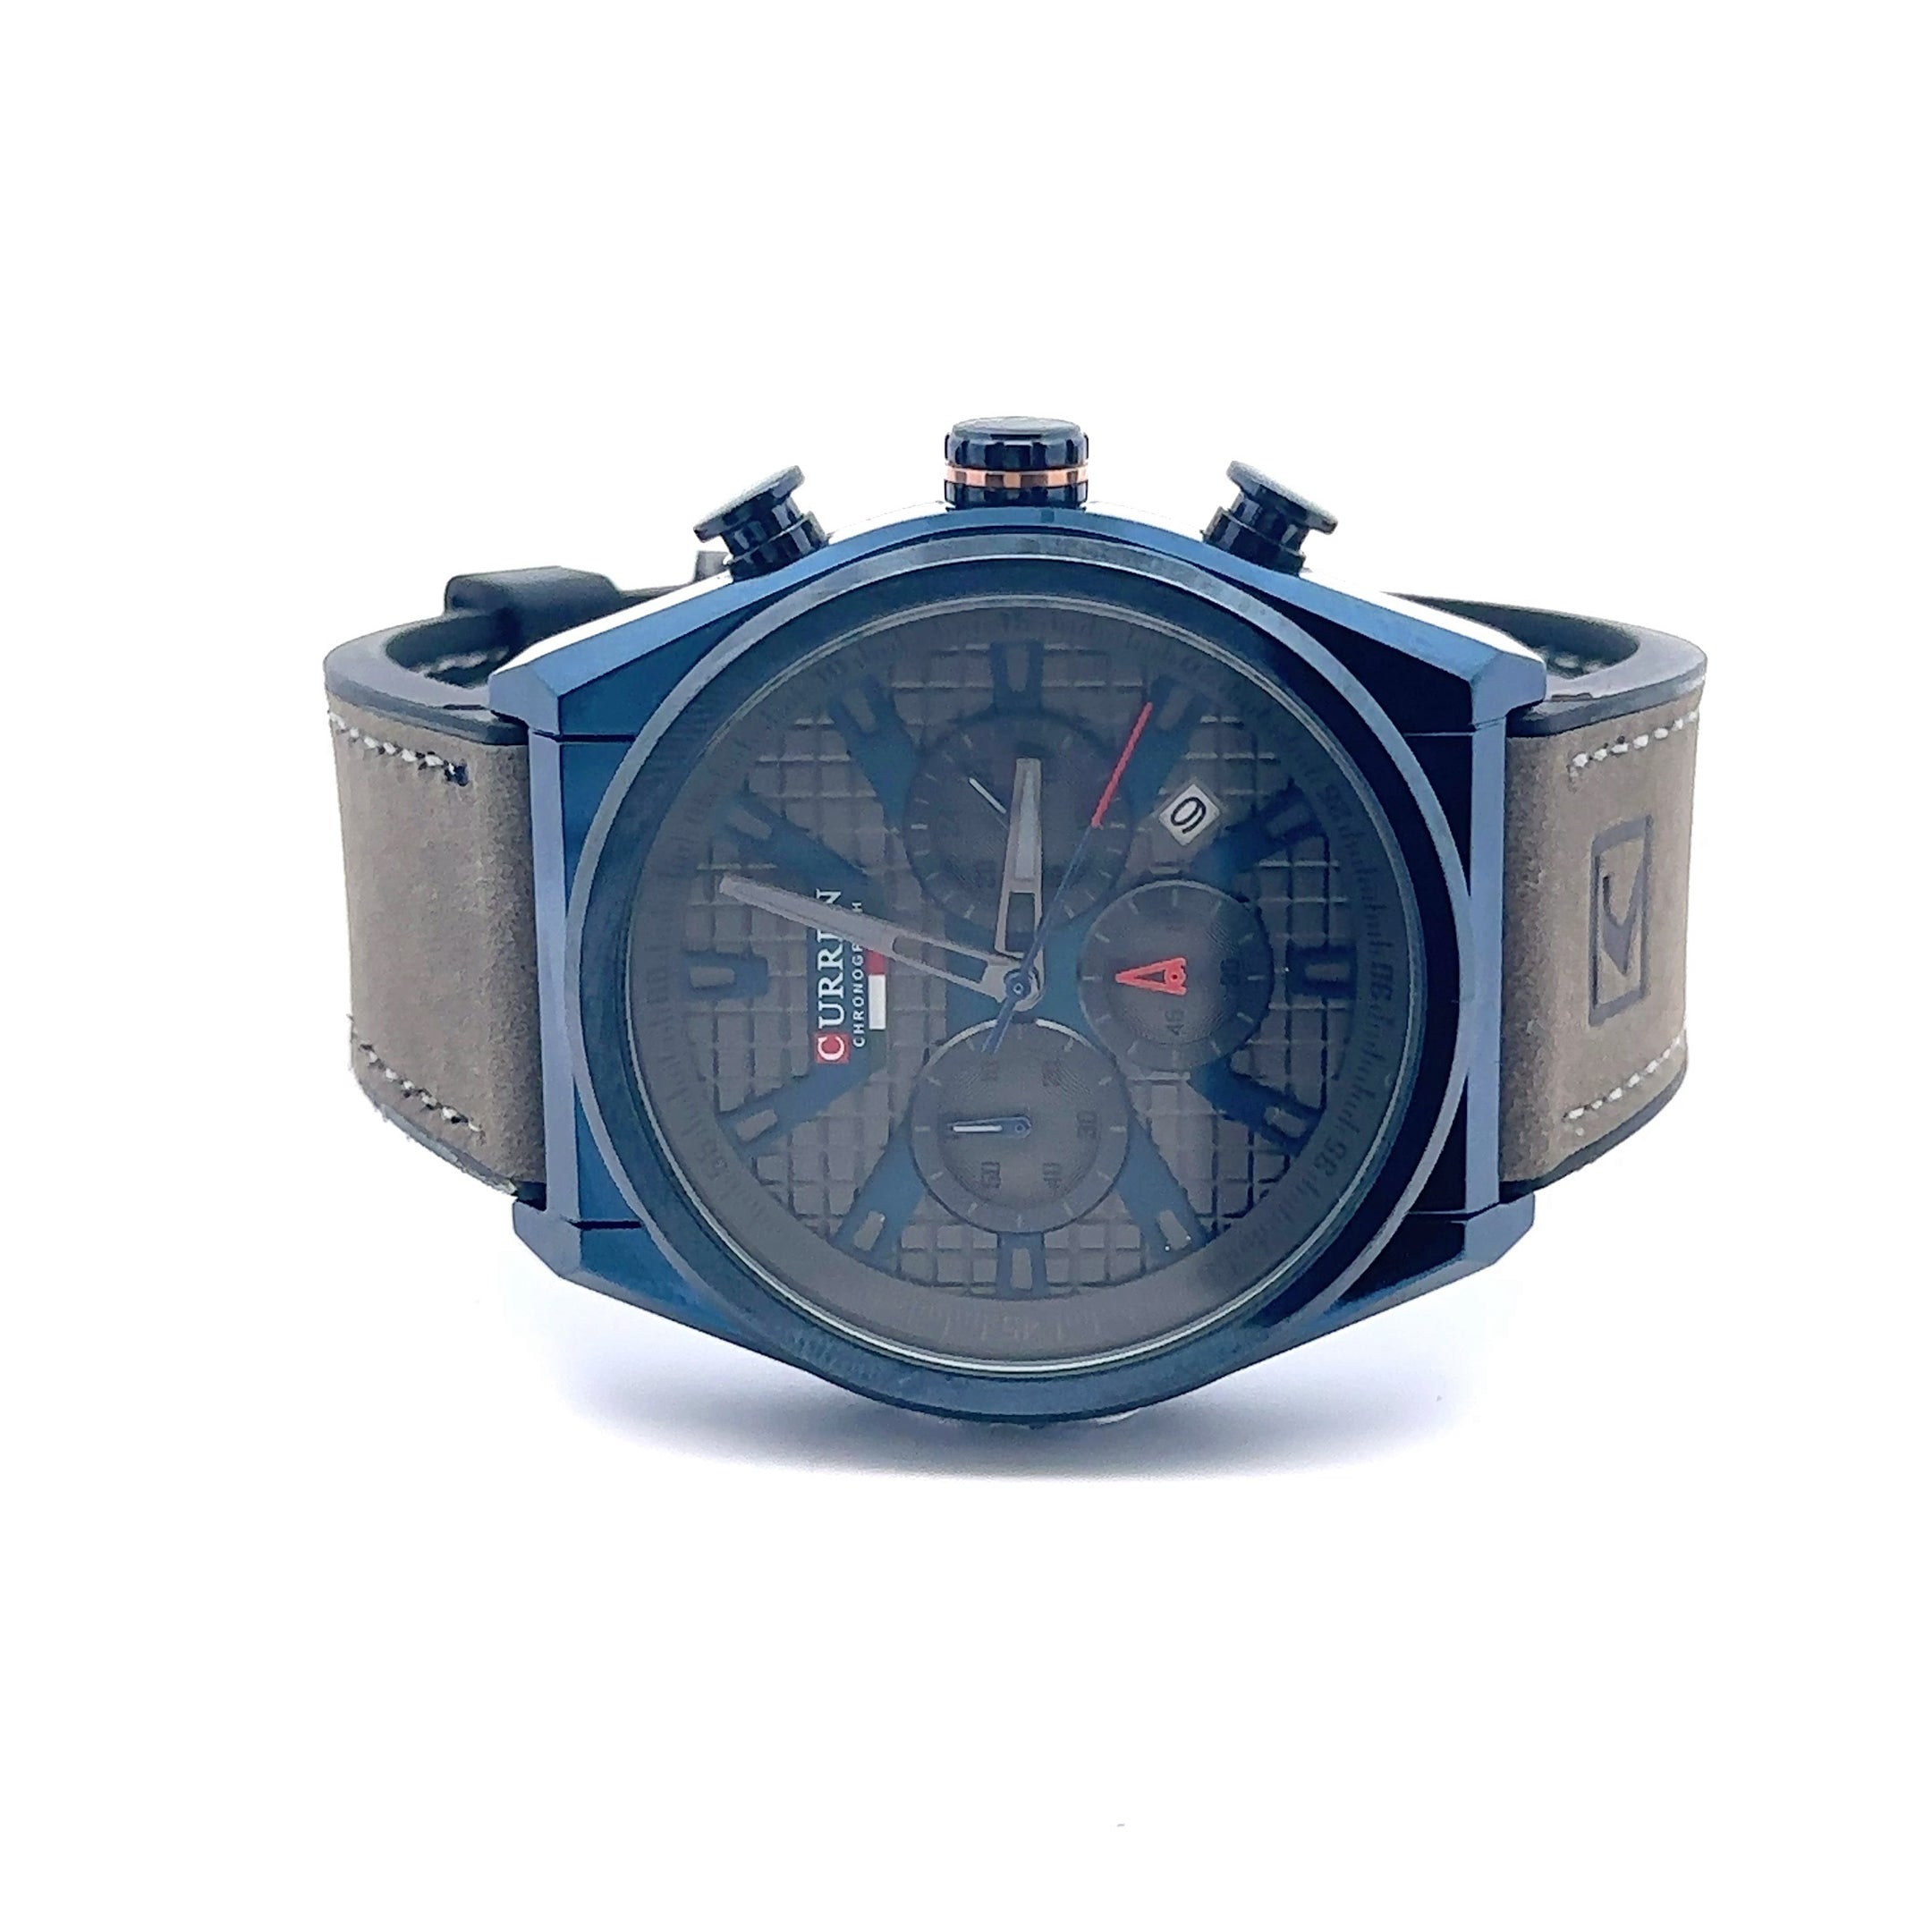 NOVATUS CURREN GREY LEATHER ICED OUT WATCH I 5416329